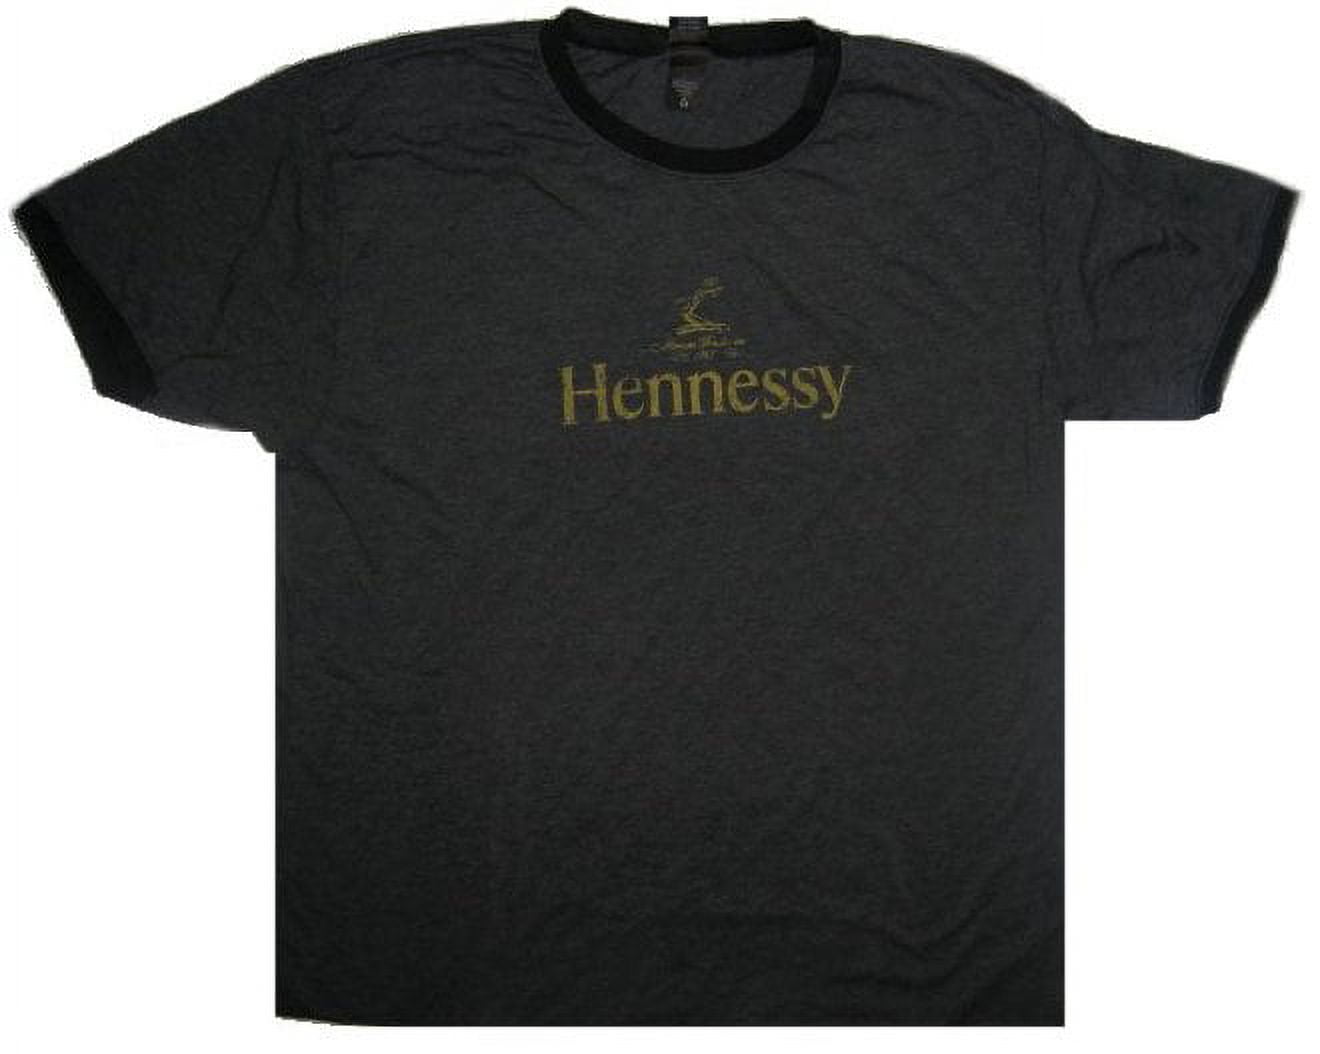 Hennessy V.S Cognac Maison Fondee 1765 T Shirt Gray and Gold Imprint XL NEW